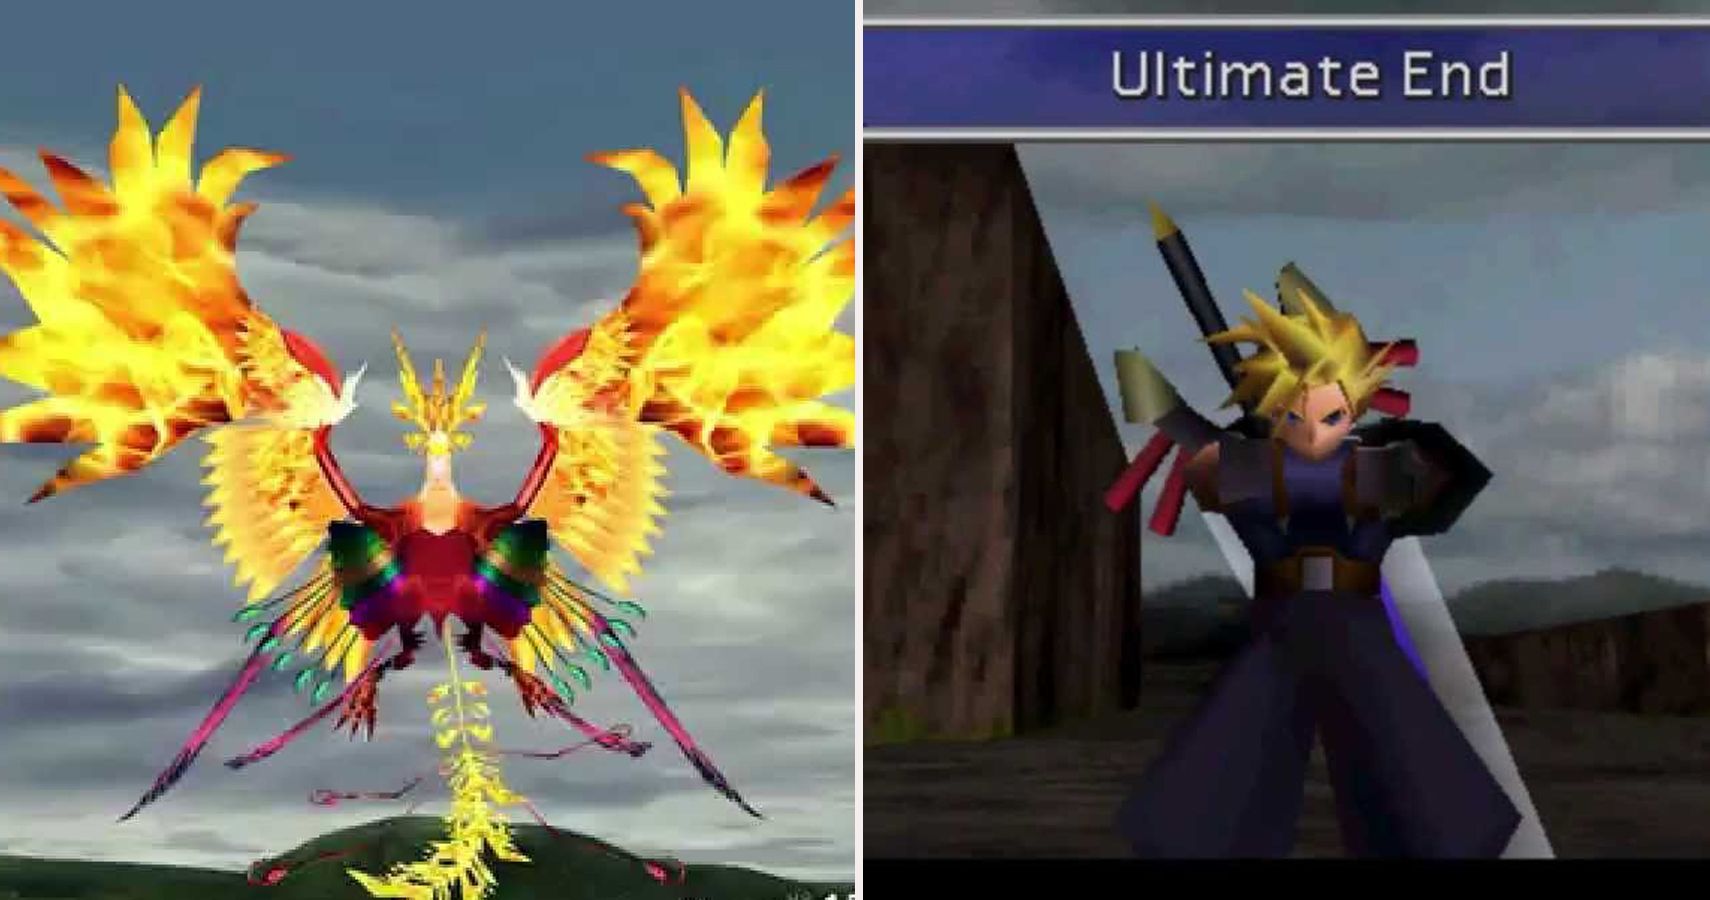 The Most Powerful Materia Combinations In Final Fantasy 7 Ranked. 